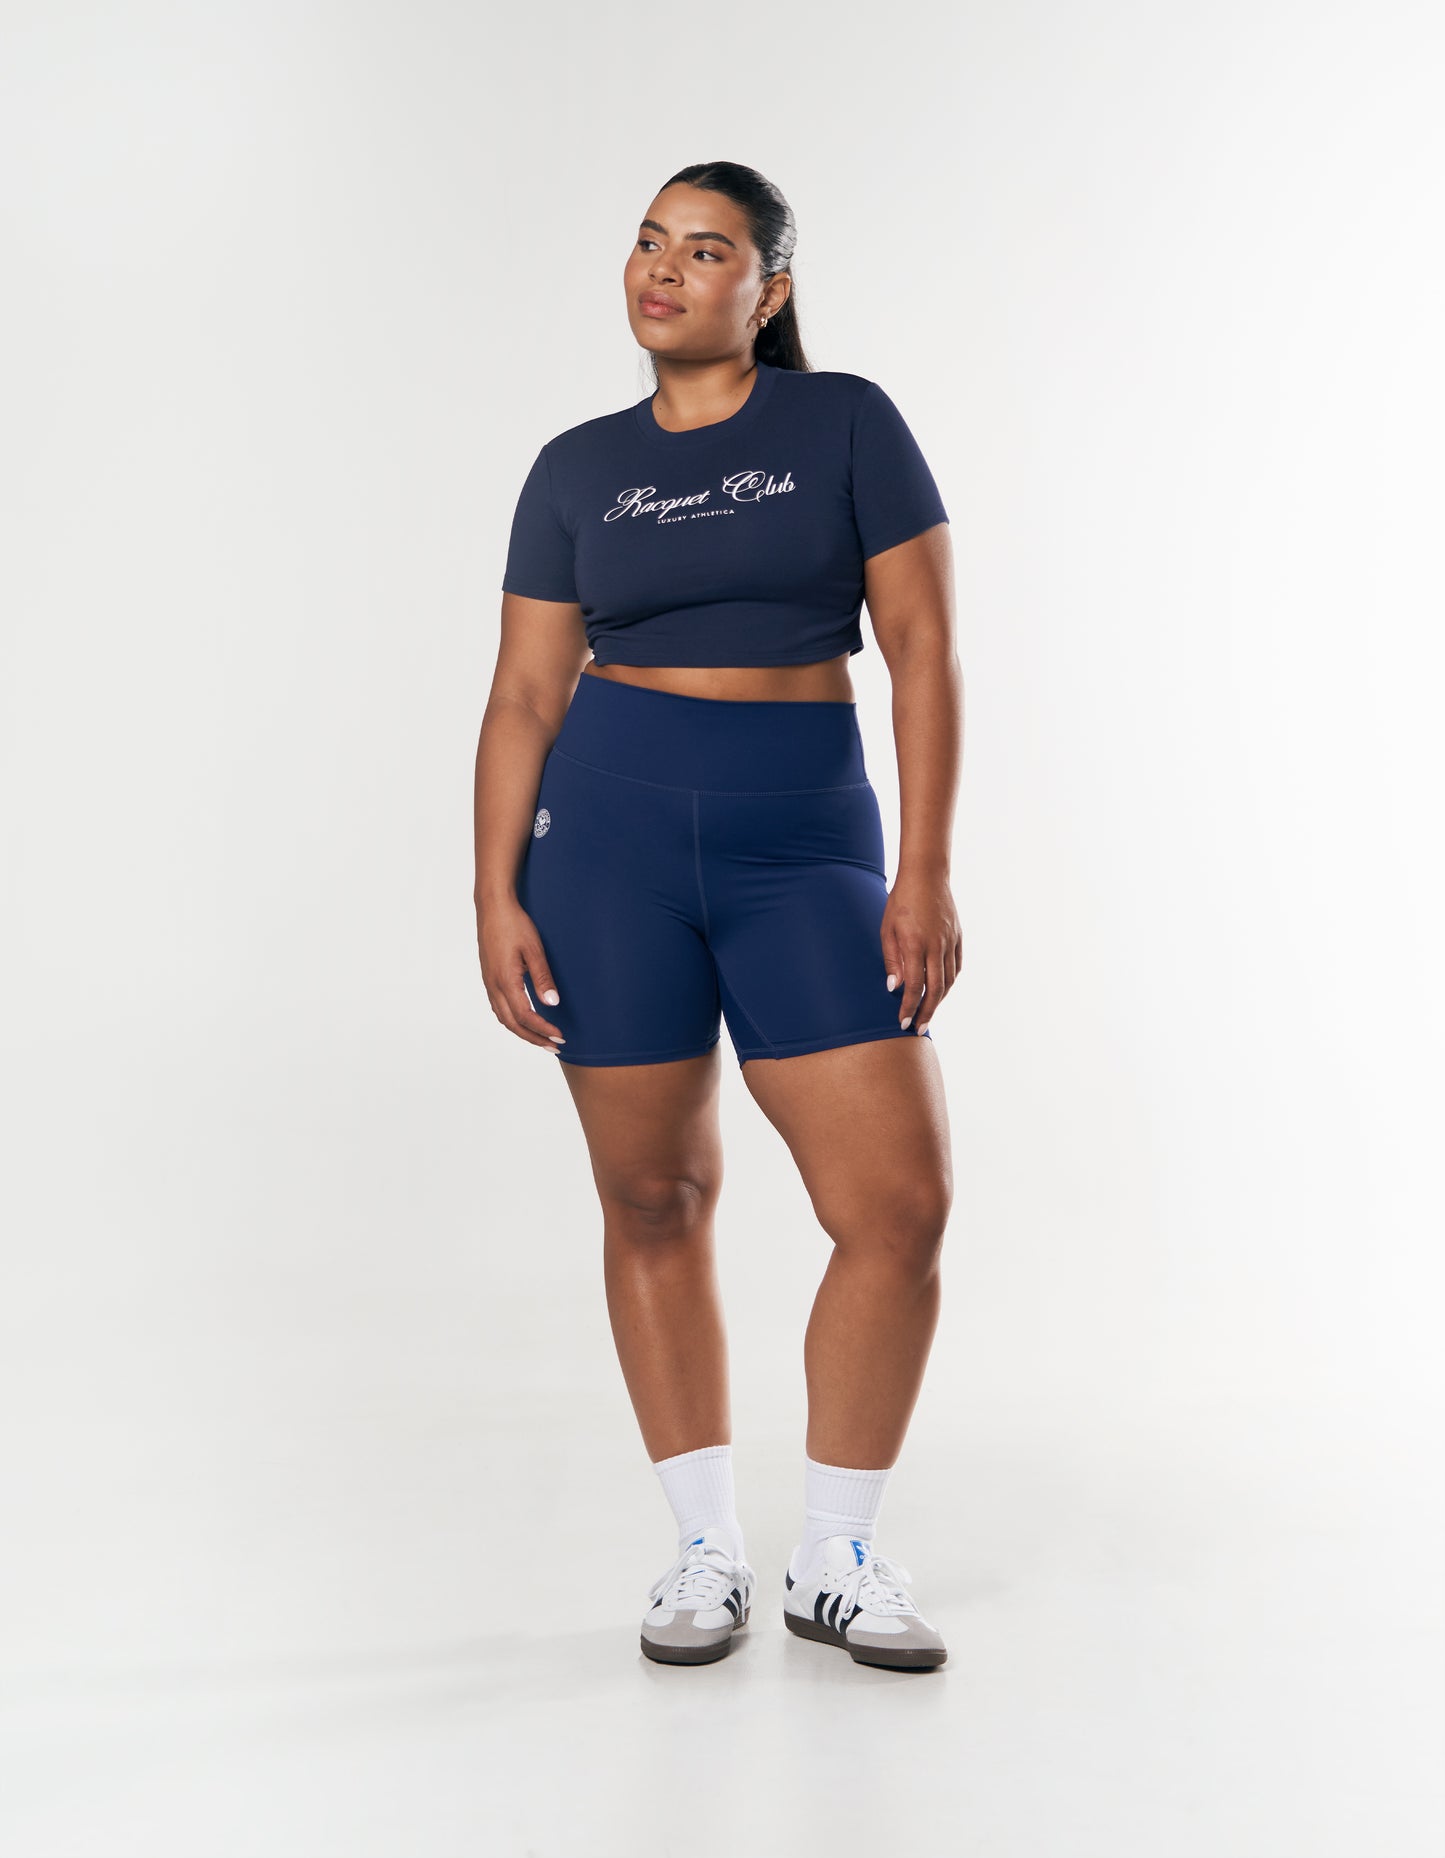 Racquet Club Cropped Tee - Navy